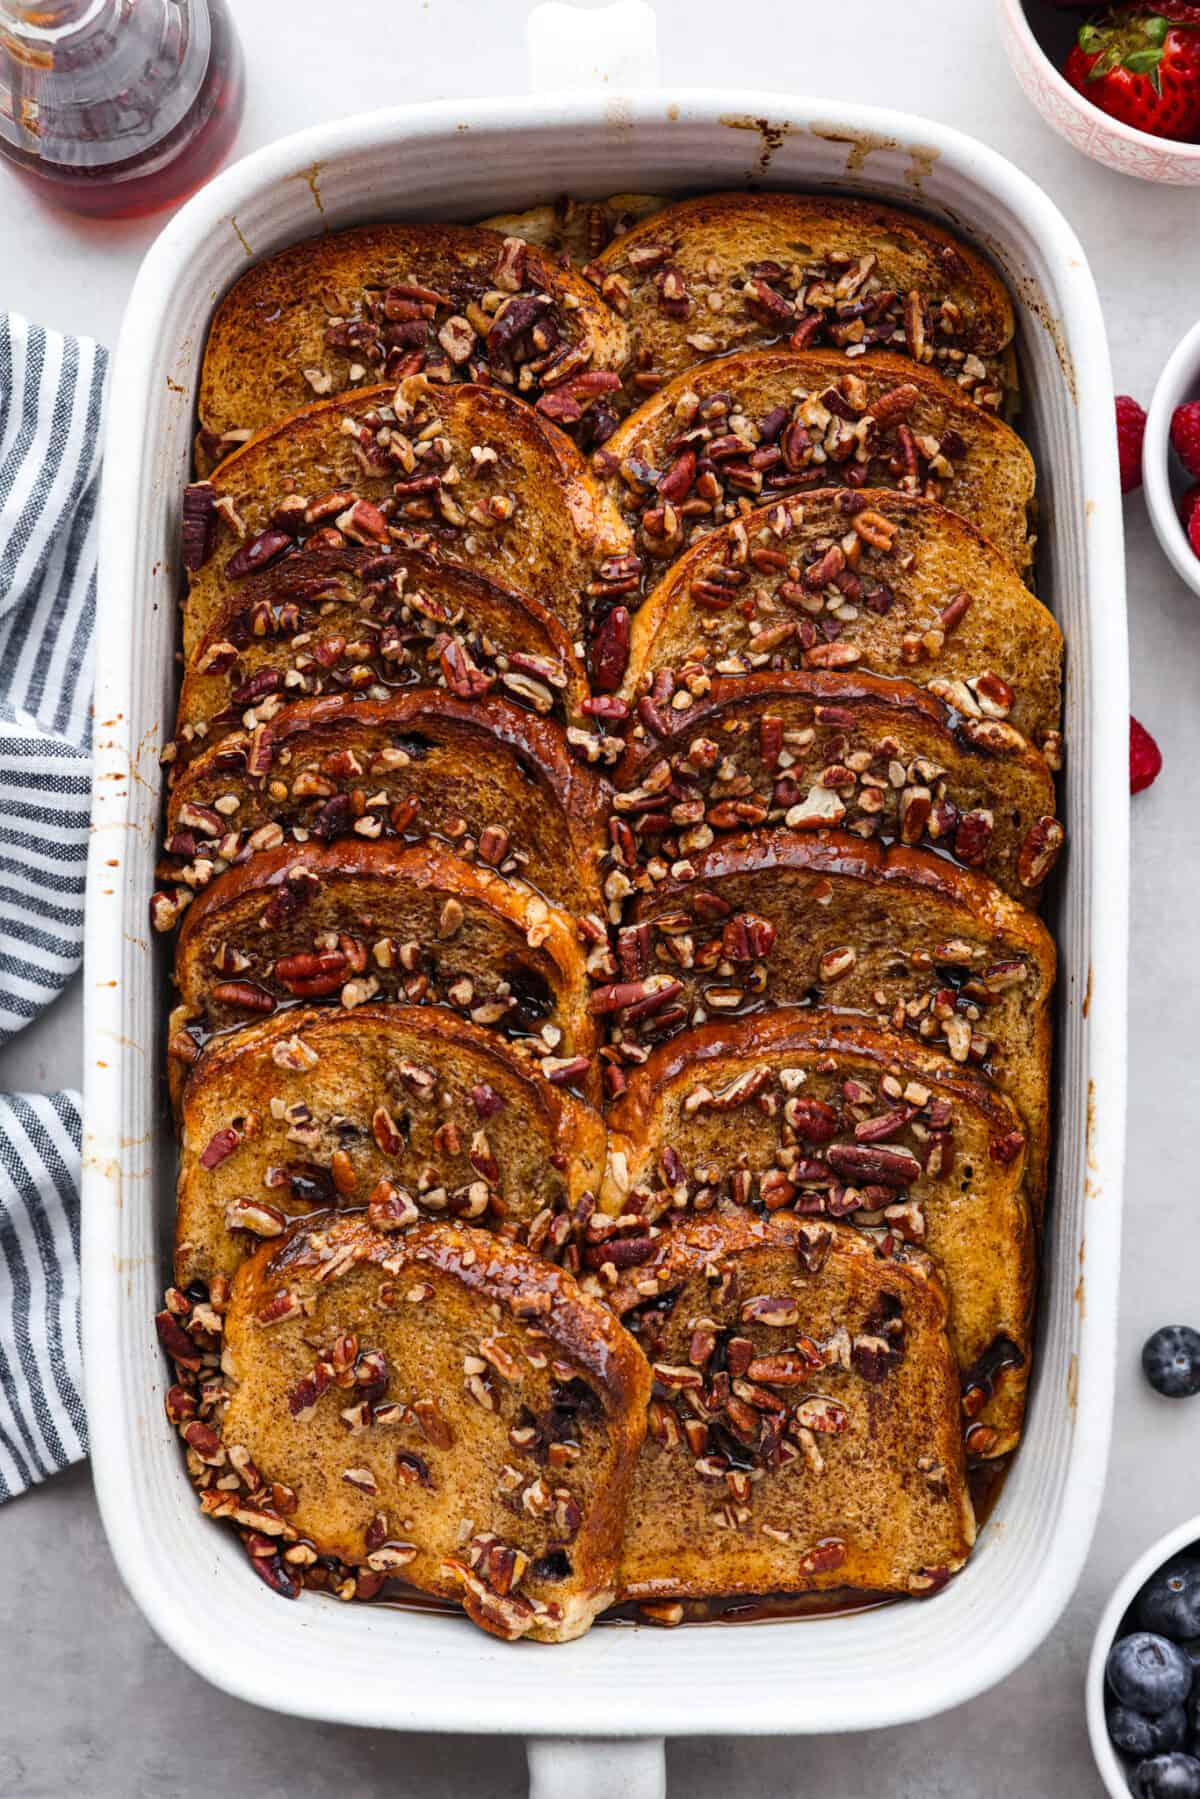 Baked French toast in a baking dish, topped with pecans.